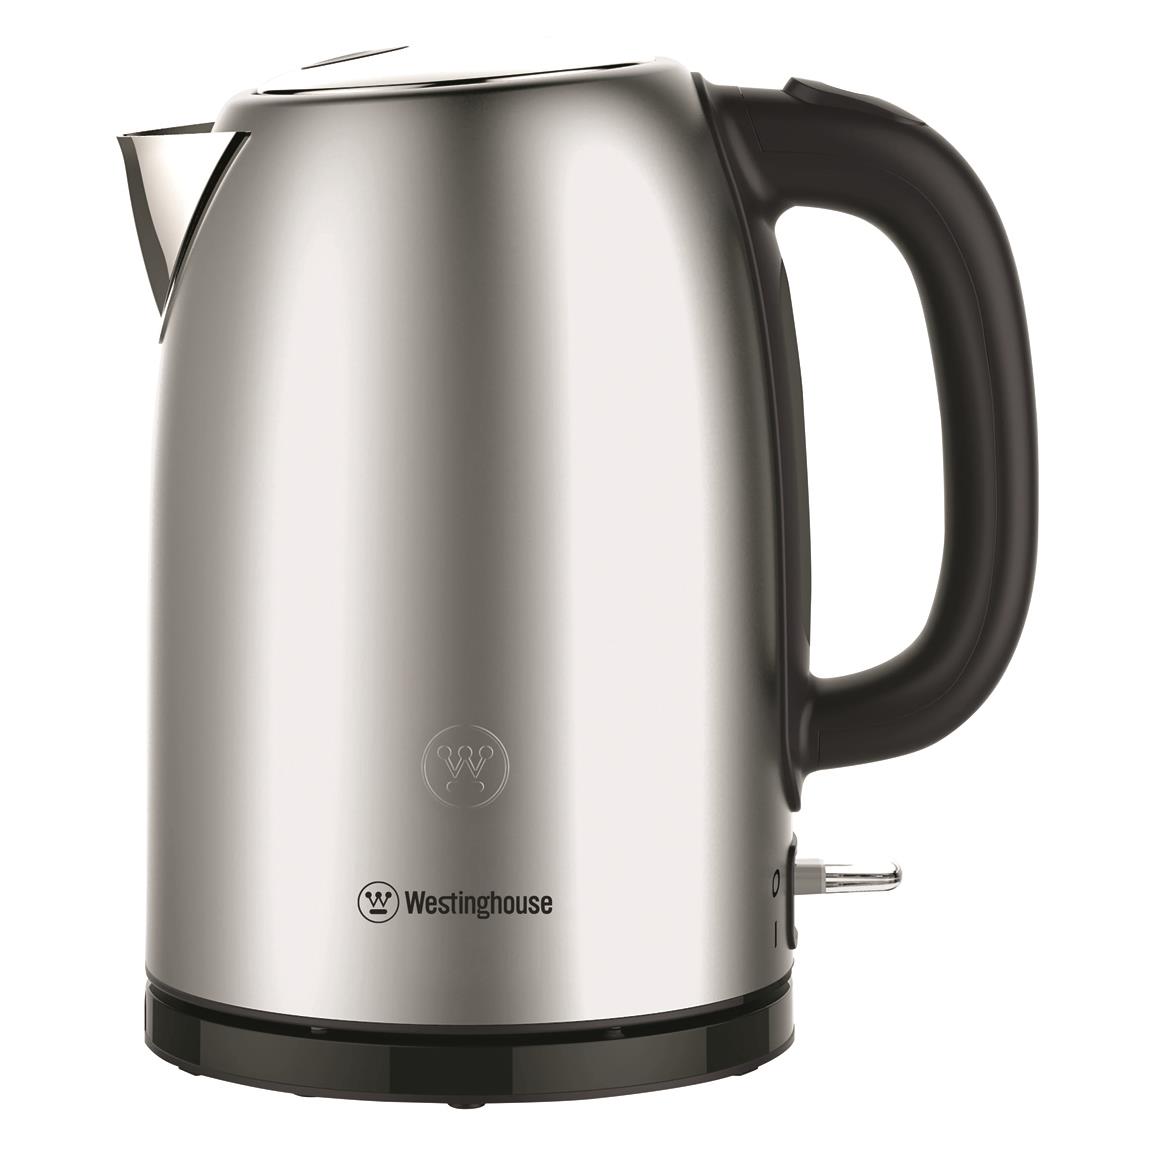 Westinghouse Electric Kettle, 1.7 Liter